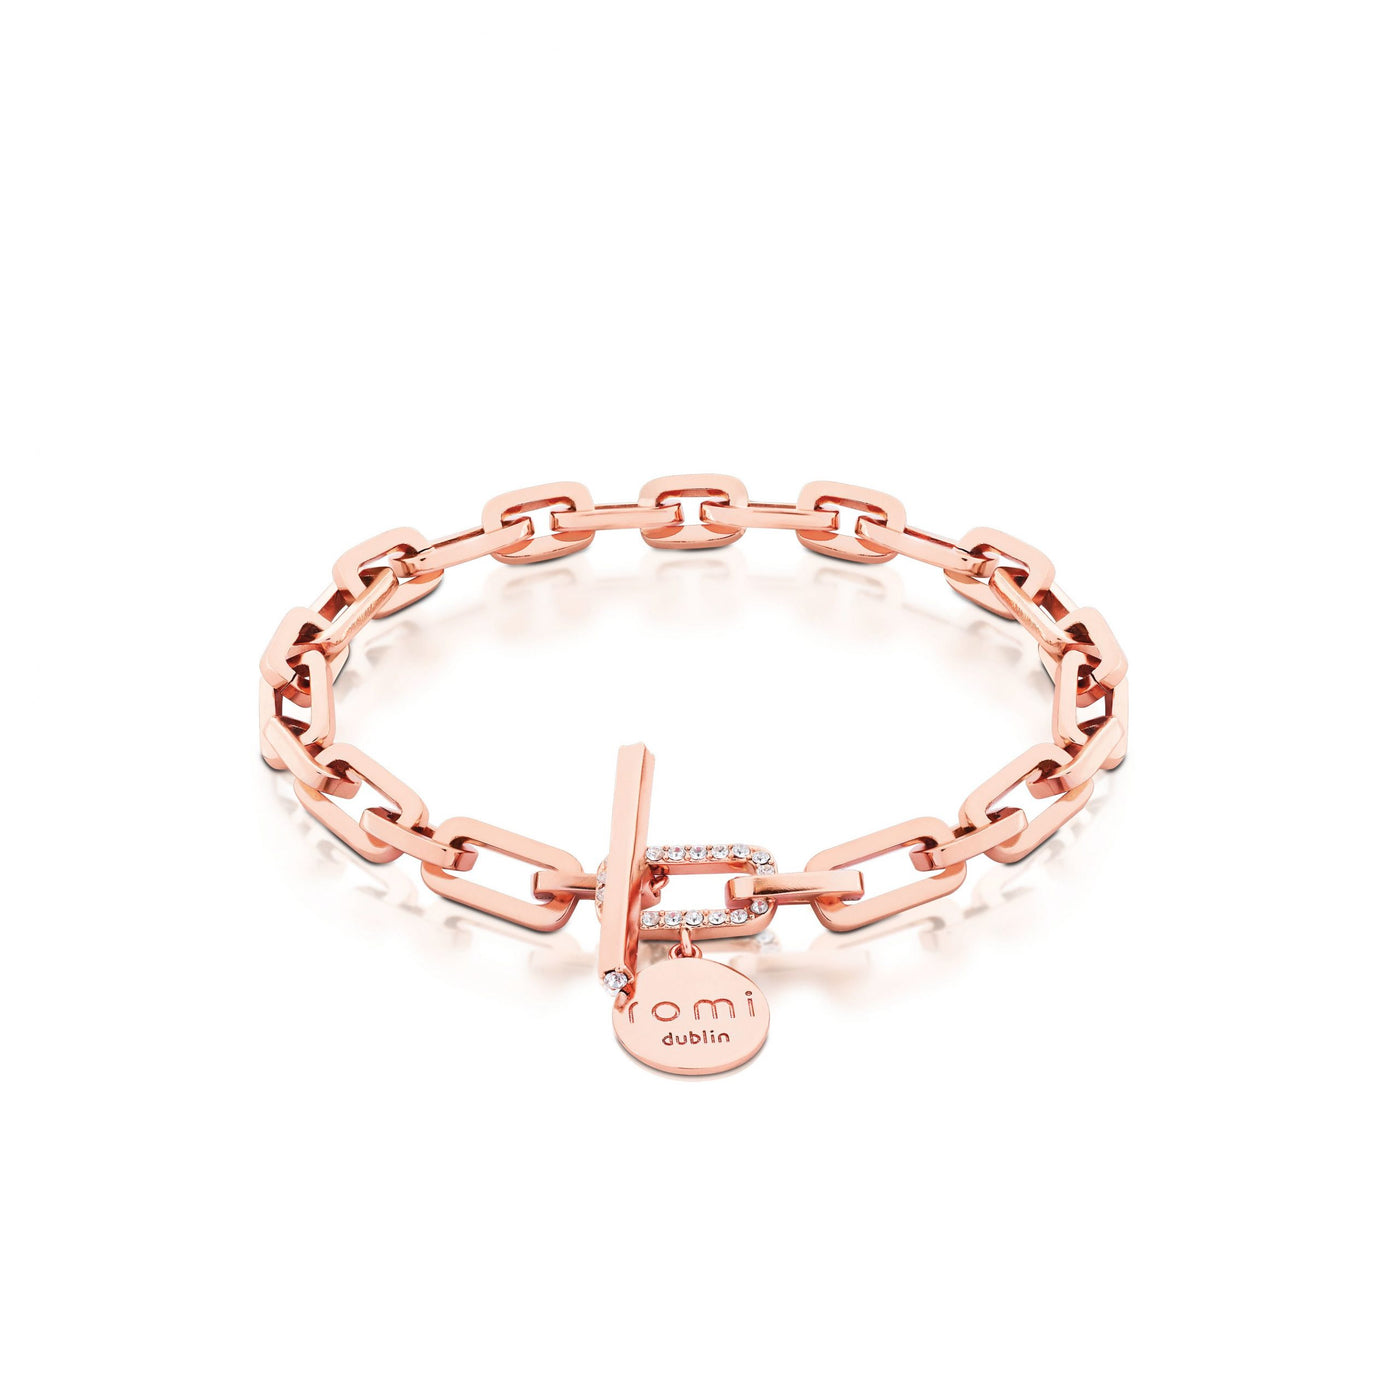 Romi Bracelet - Large Link Chain with T-Bar - Rose Gold/Silver/Gold